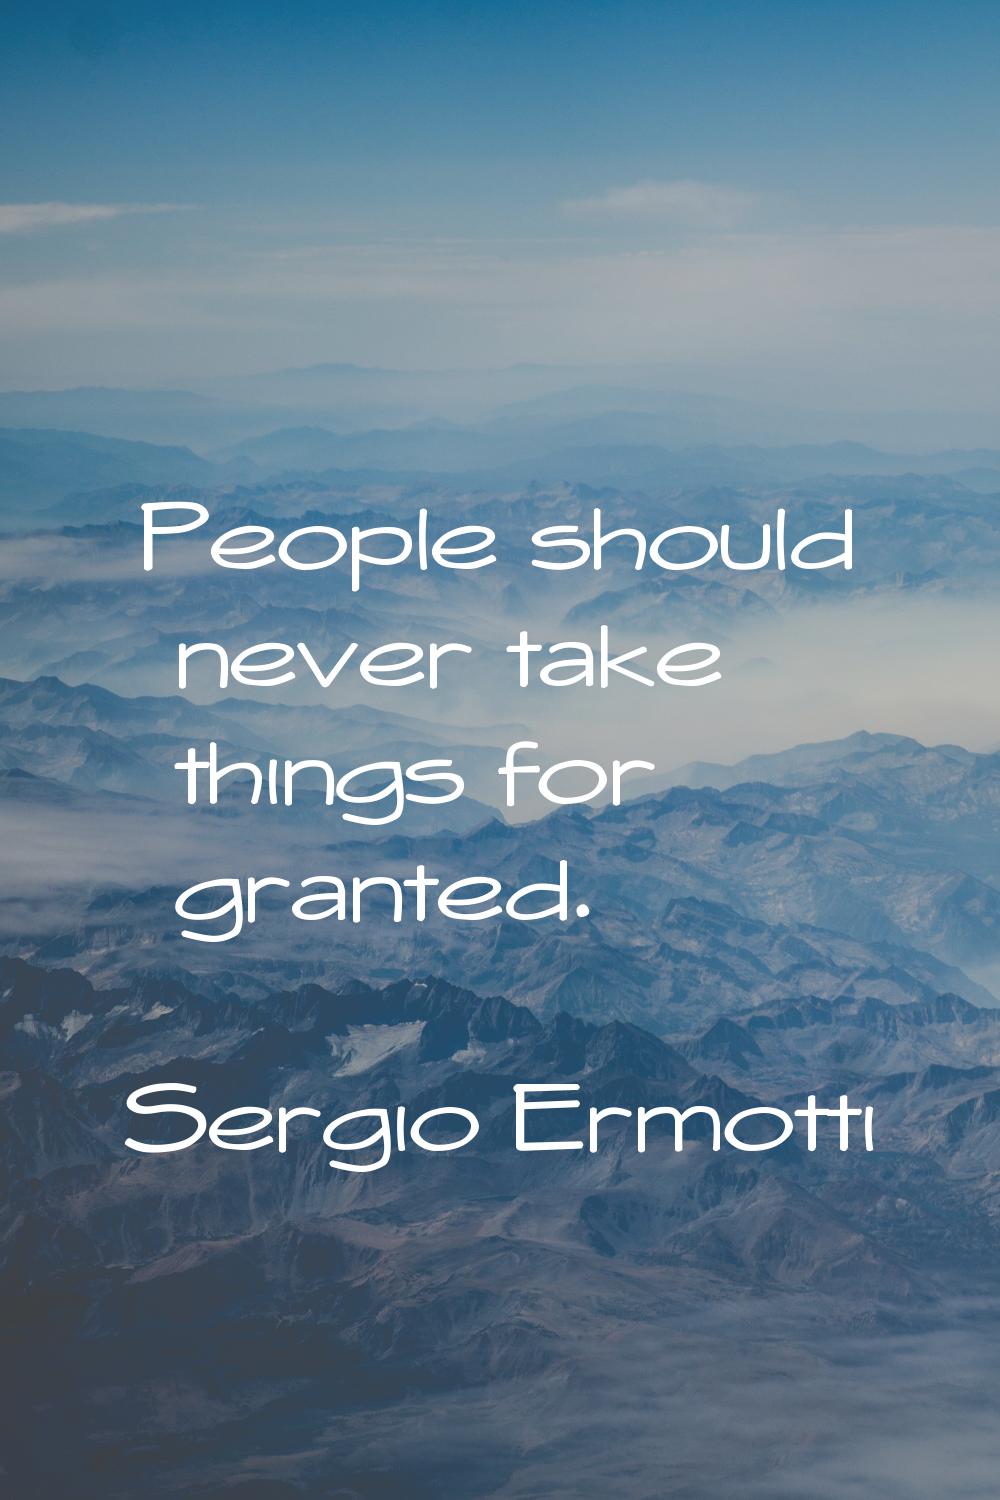 People should never take things for granted.